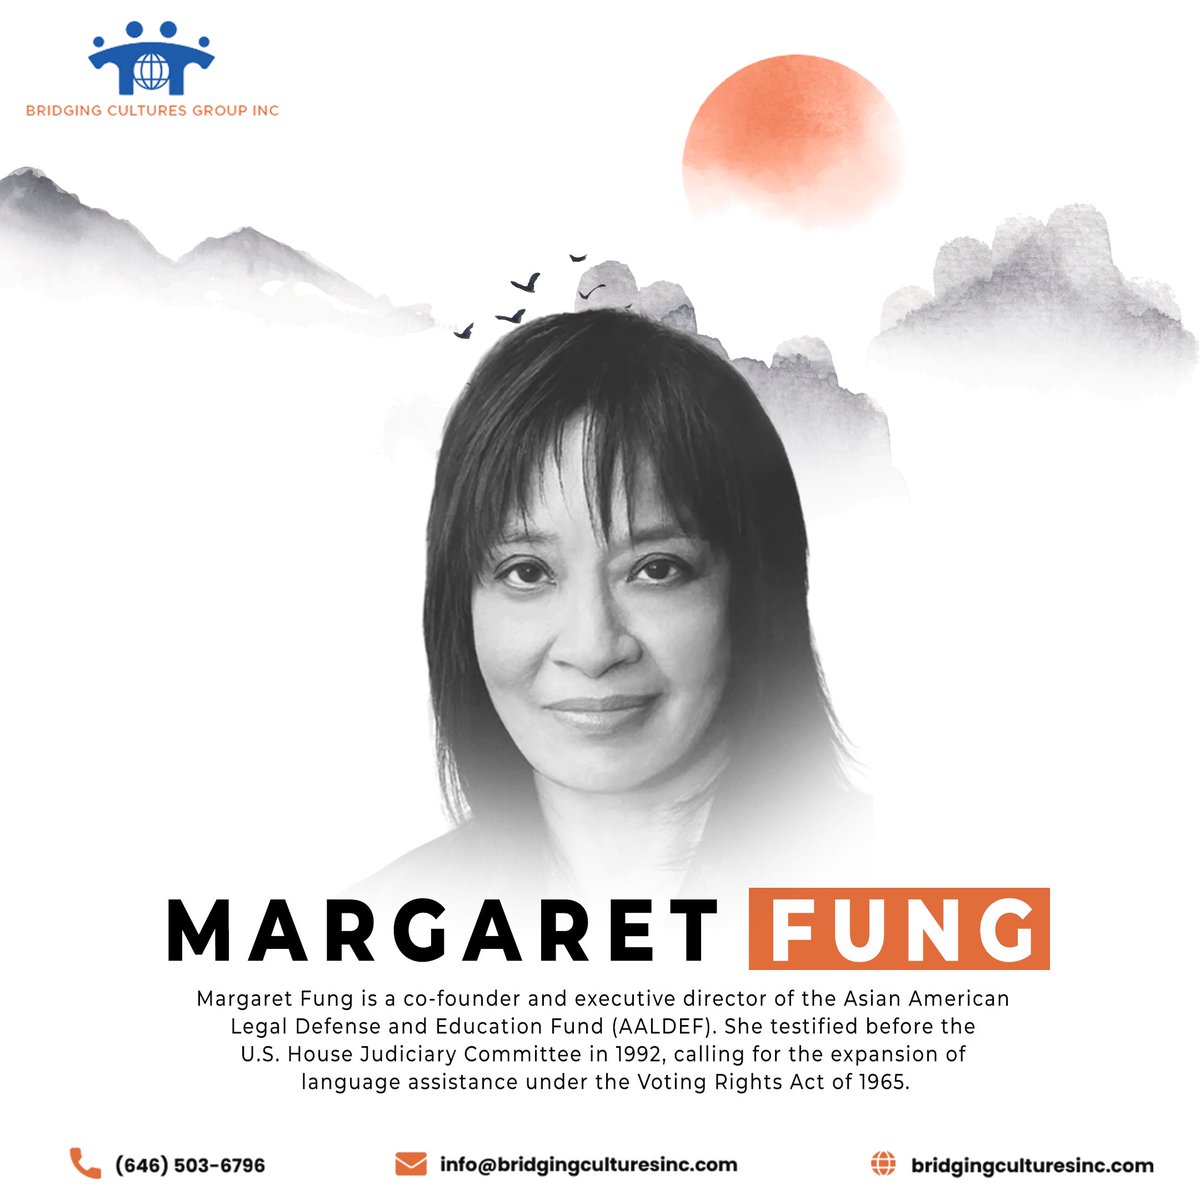 Celebrating Margaret Fung for #AAPIHeritageMonth! As founder of the Asian American Legal Defense and Education Fund, Margaret champions civil rights and empowers Asian American communities. Her dedication to justice and equality inspires us all.

#BCG #Leadership #CommunityImpact